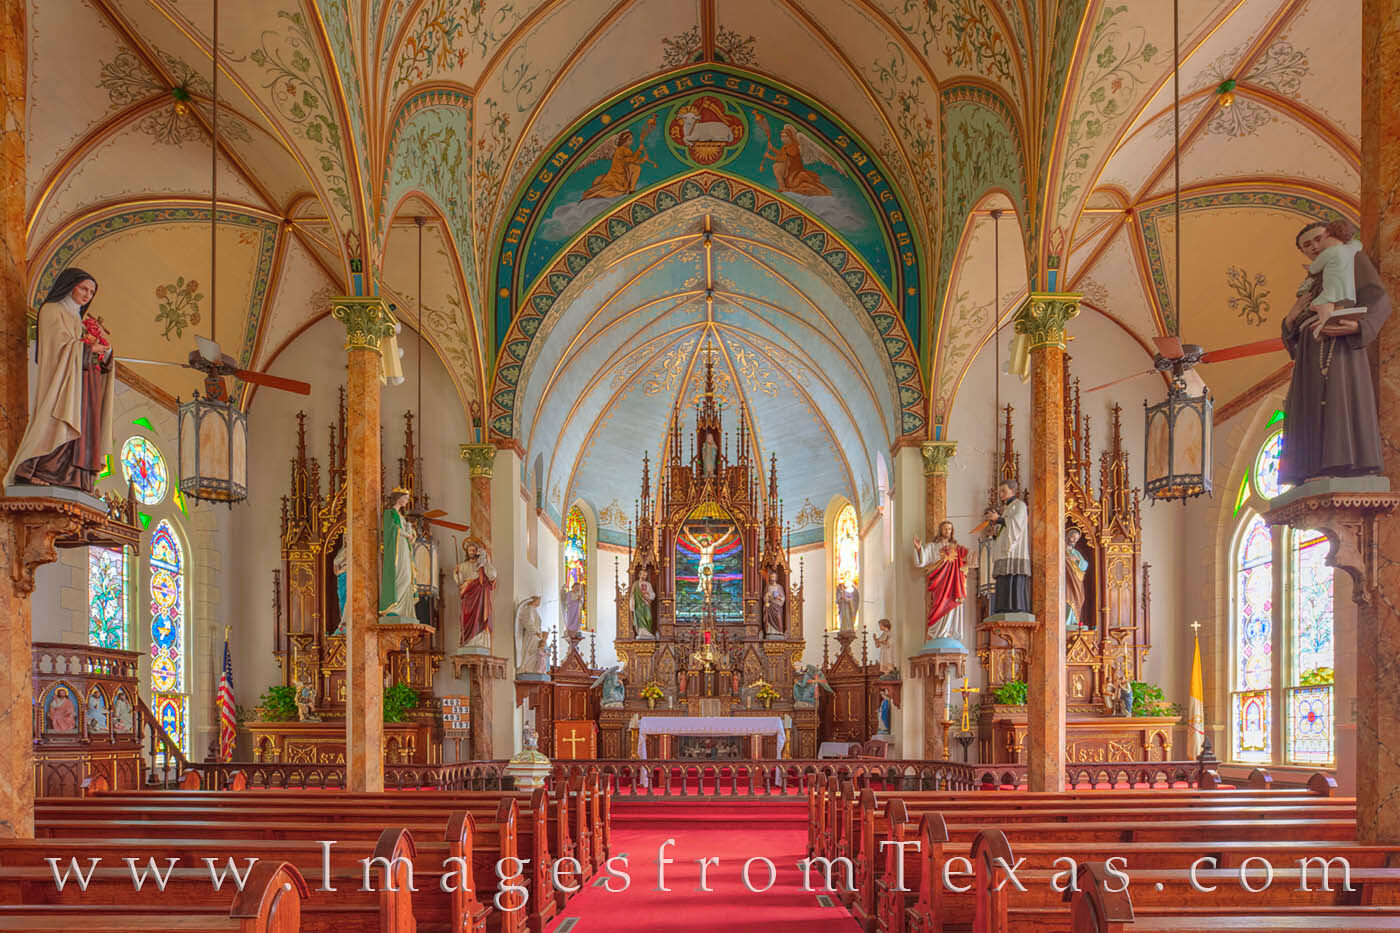 St. Mary Catholic Church in High Hill, Texas, was built in 1906 and designed by famed architect Leo Dielmann. Known as the “...